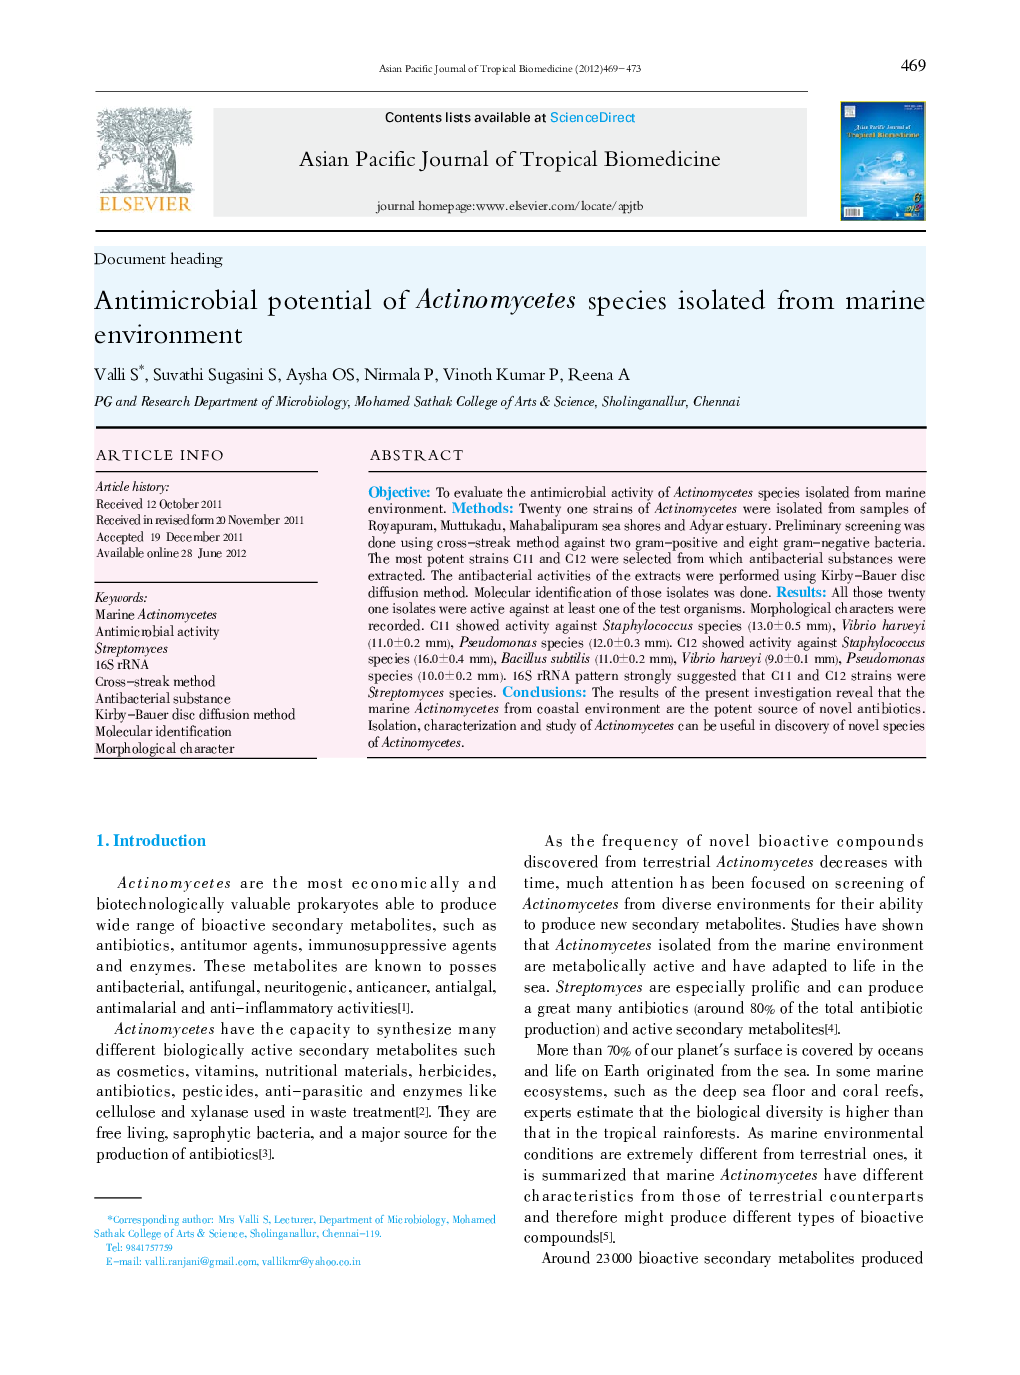 Antimicrobial potential of Actinomycetes species isolated from marine environment